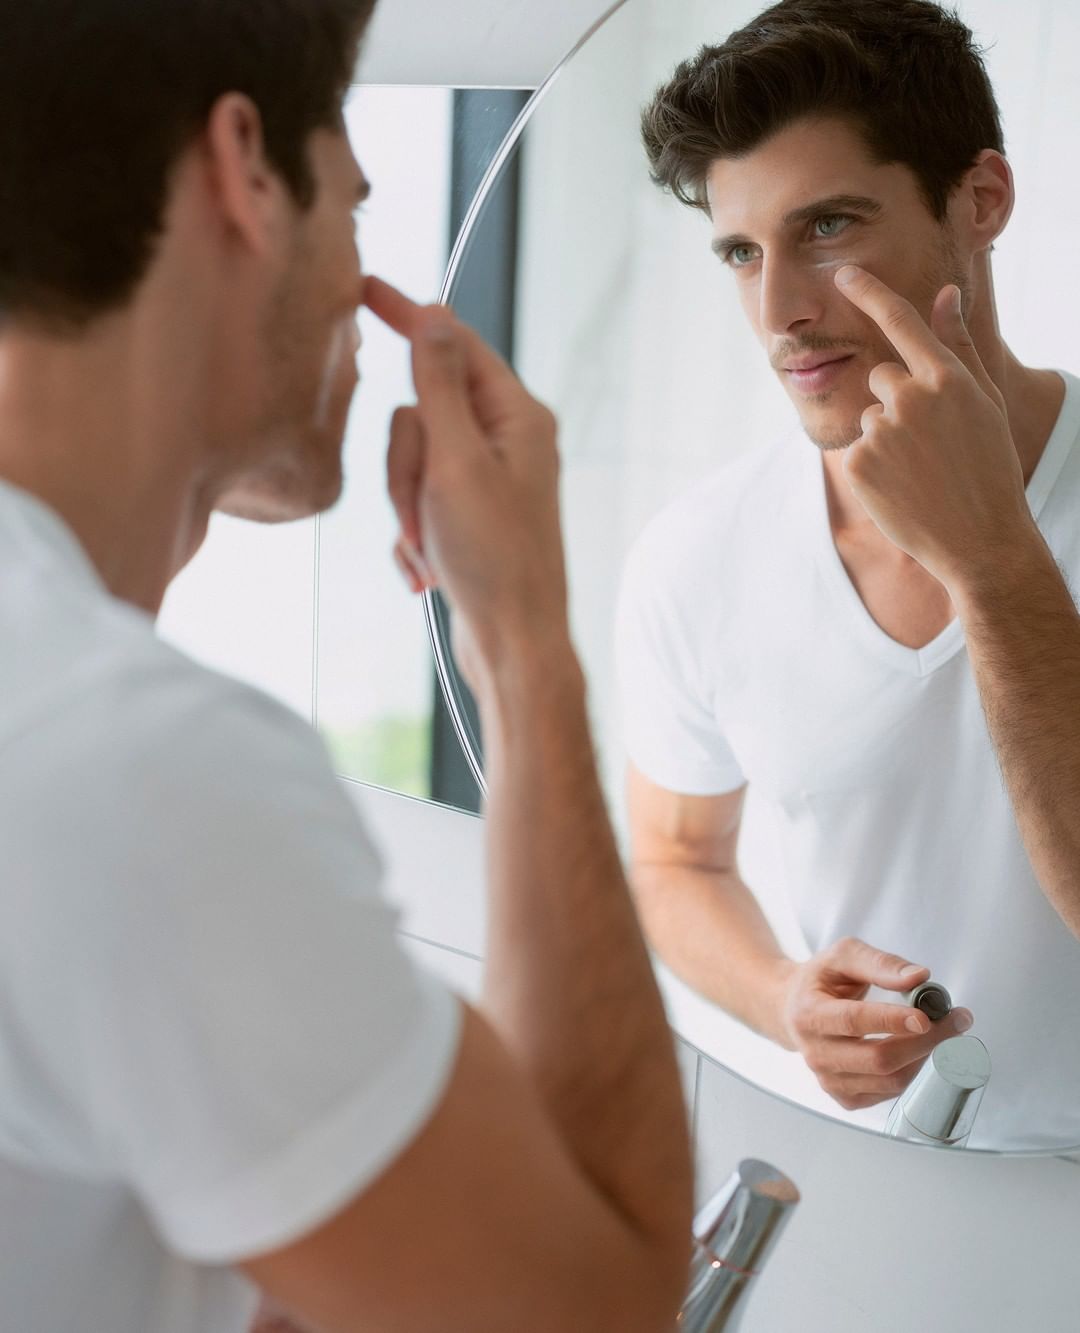 AHAVA - Did you know that we make a line for men, too? This Father's Day, give the guy in your life the gift of skincare designed with care, especially for him. Take 30% off of our men's gift sets wit...